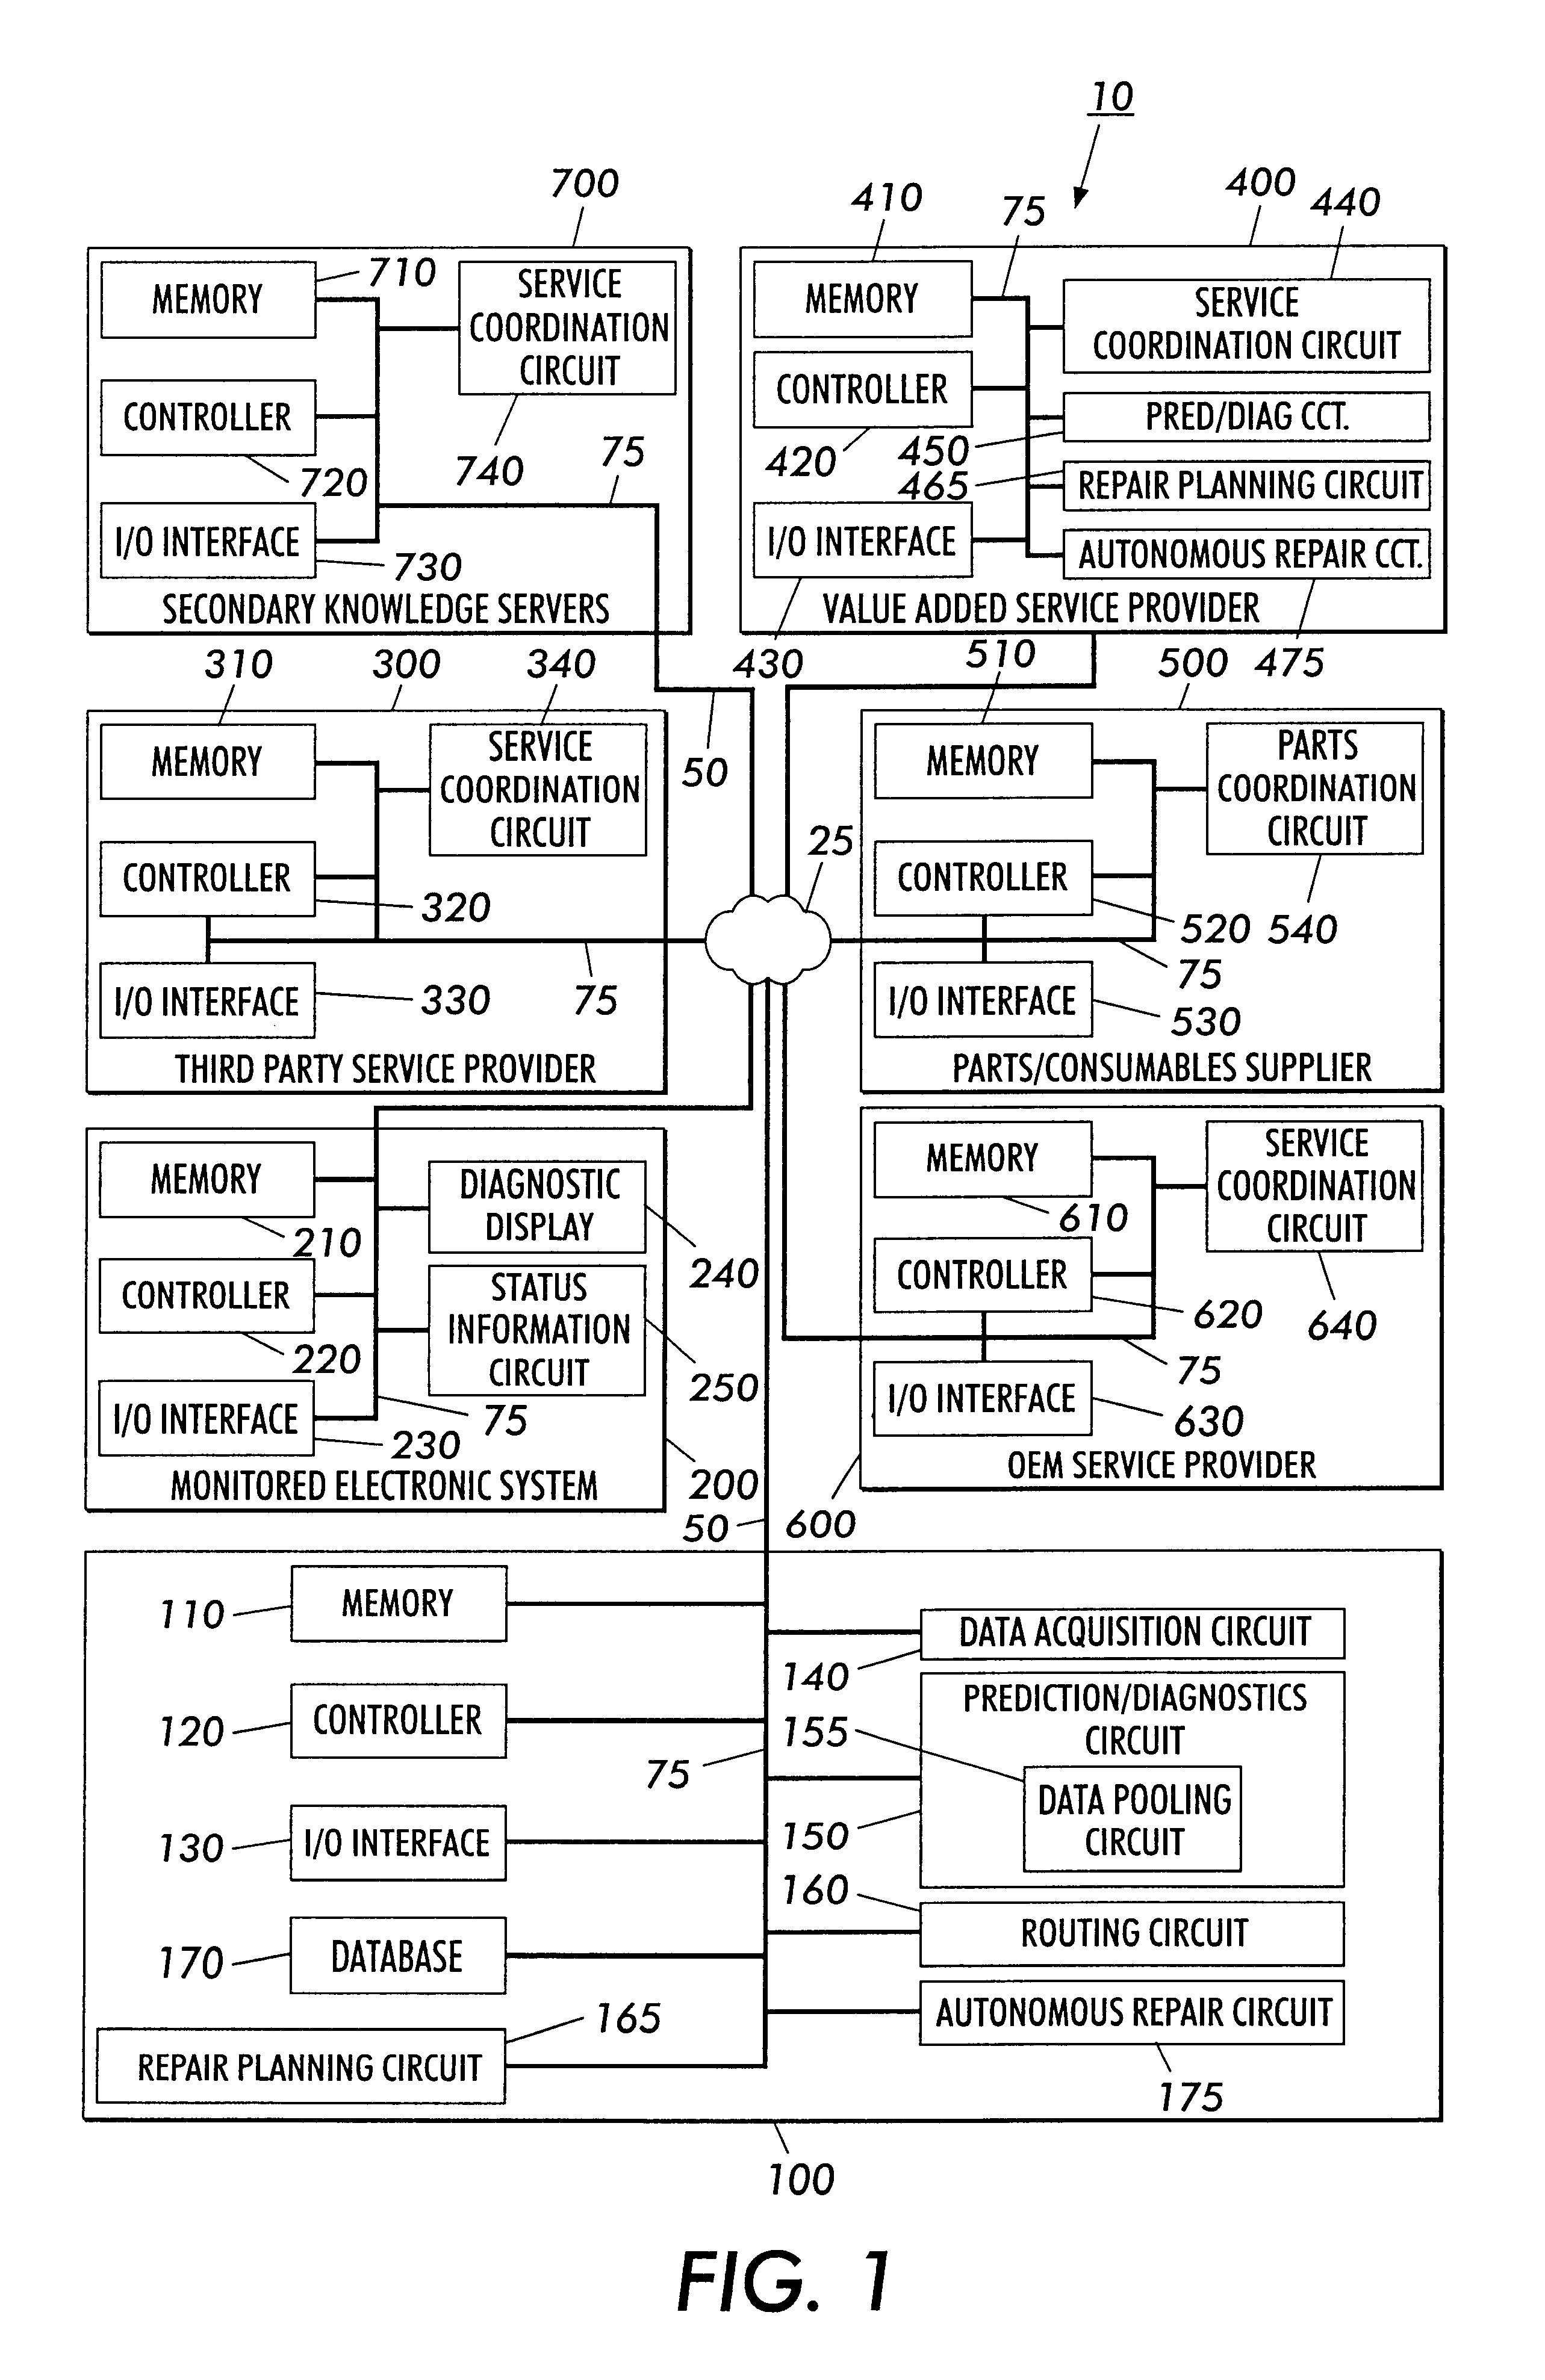 Systems and methods for failure prediction, diagnosis and remediation using data acquisition and feedback for a distributed electronic system